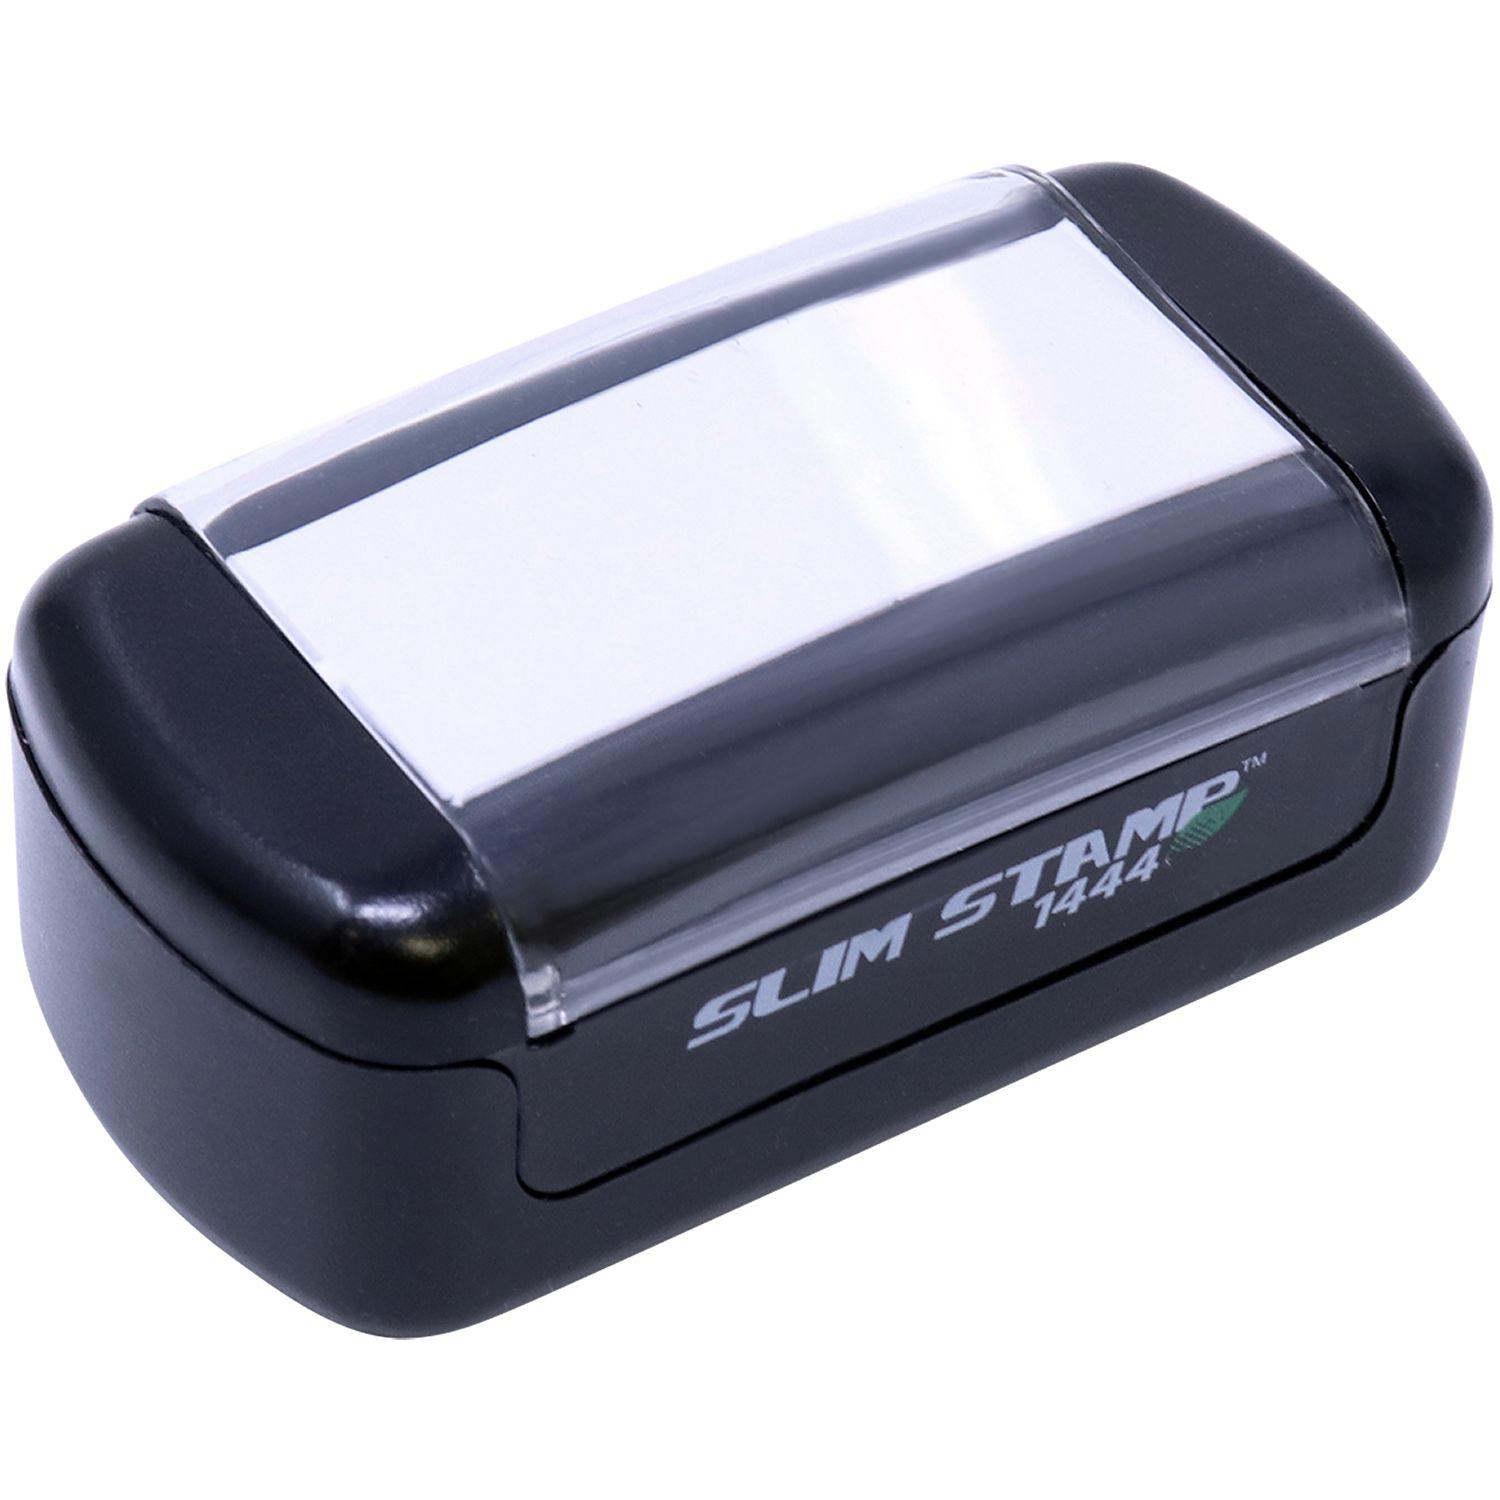 Top Down View of Slim Pre-Inked Non-Smoker Stamp